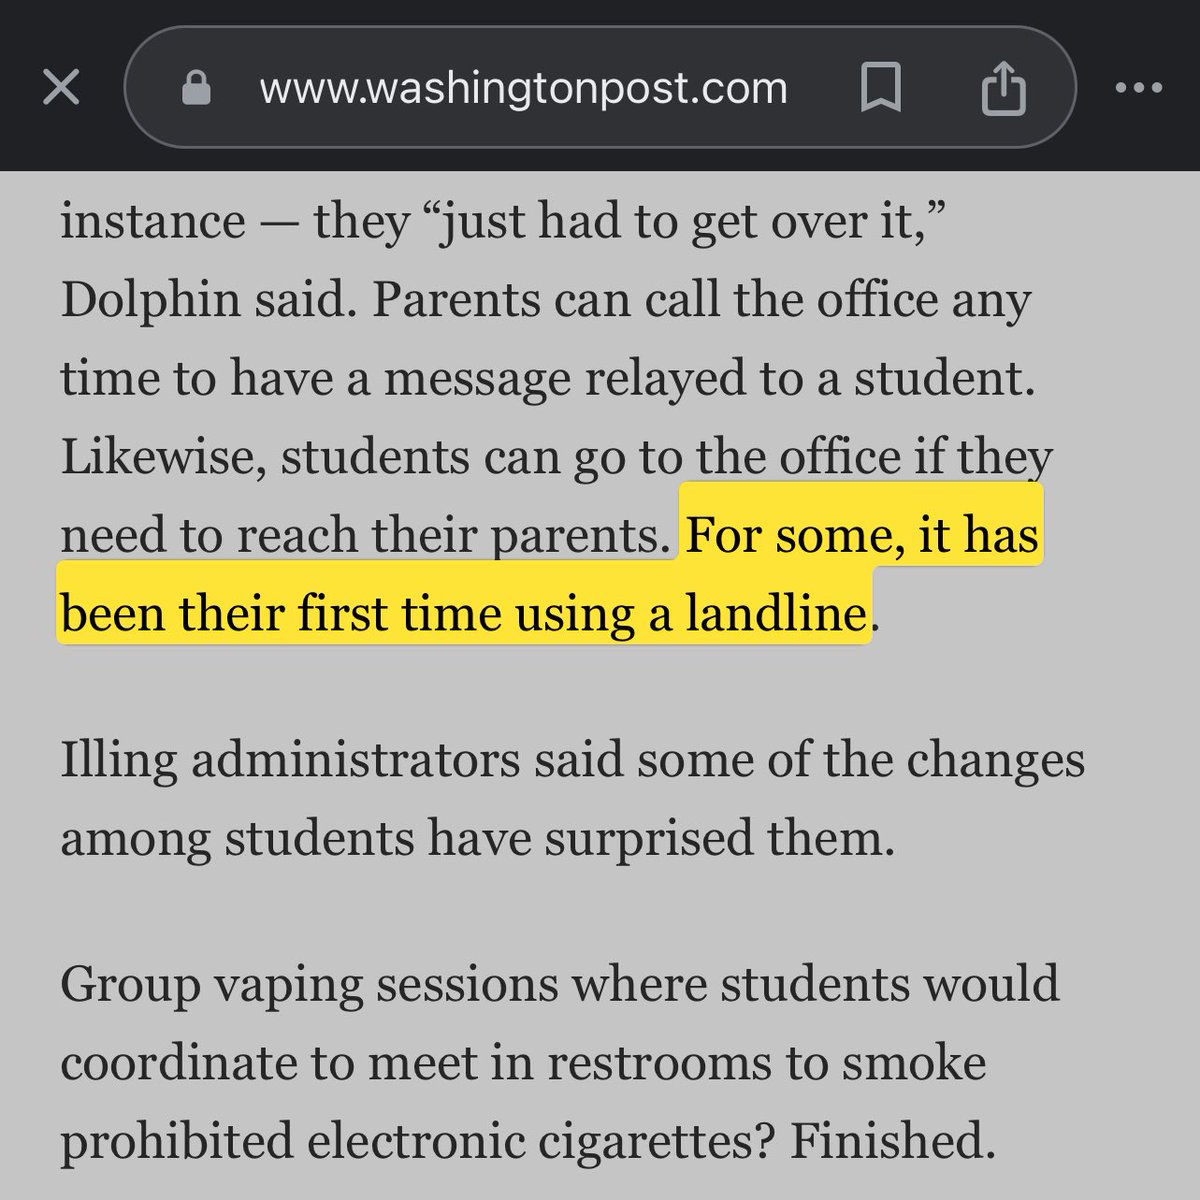 I was reading an article on a (long overdue) cell phone ban in primary/secondary school classes, and this was a funny detail: